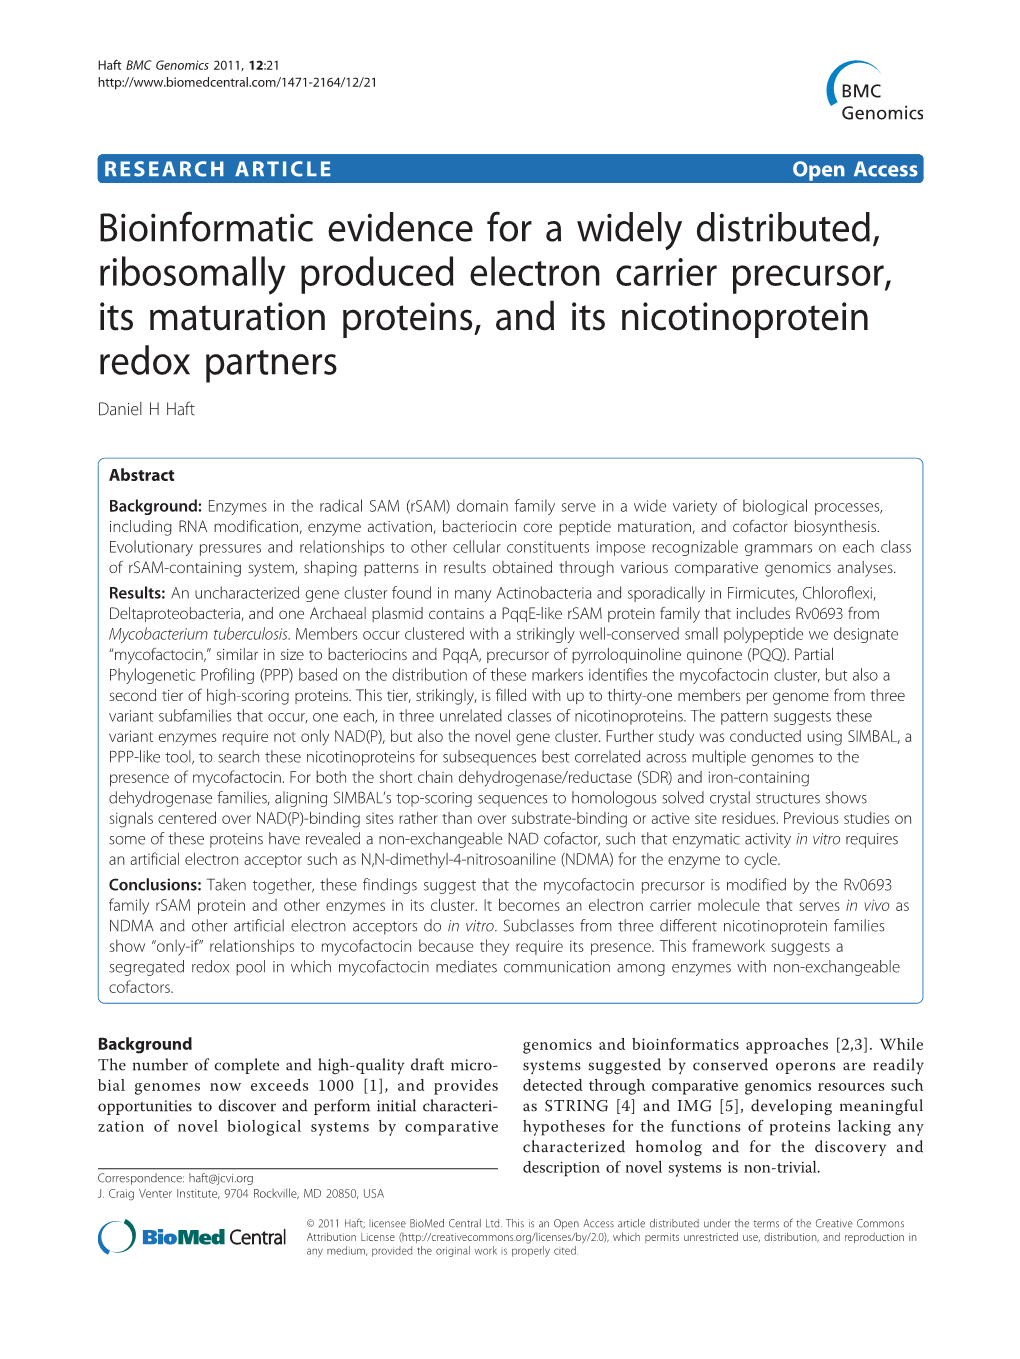 Bioinformatic Evidence for a Widely Distributed, Ribosomally Produced